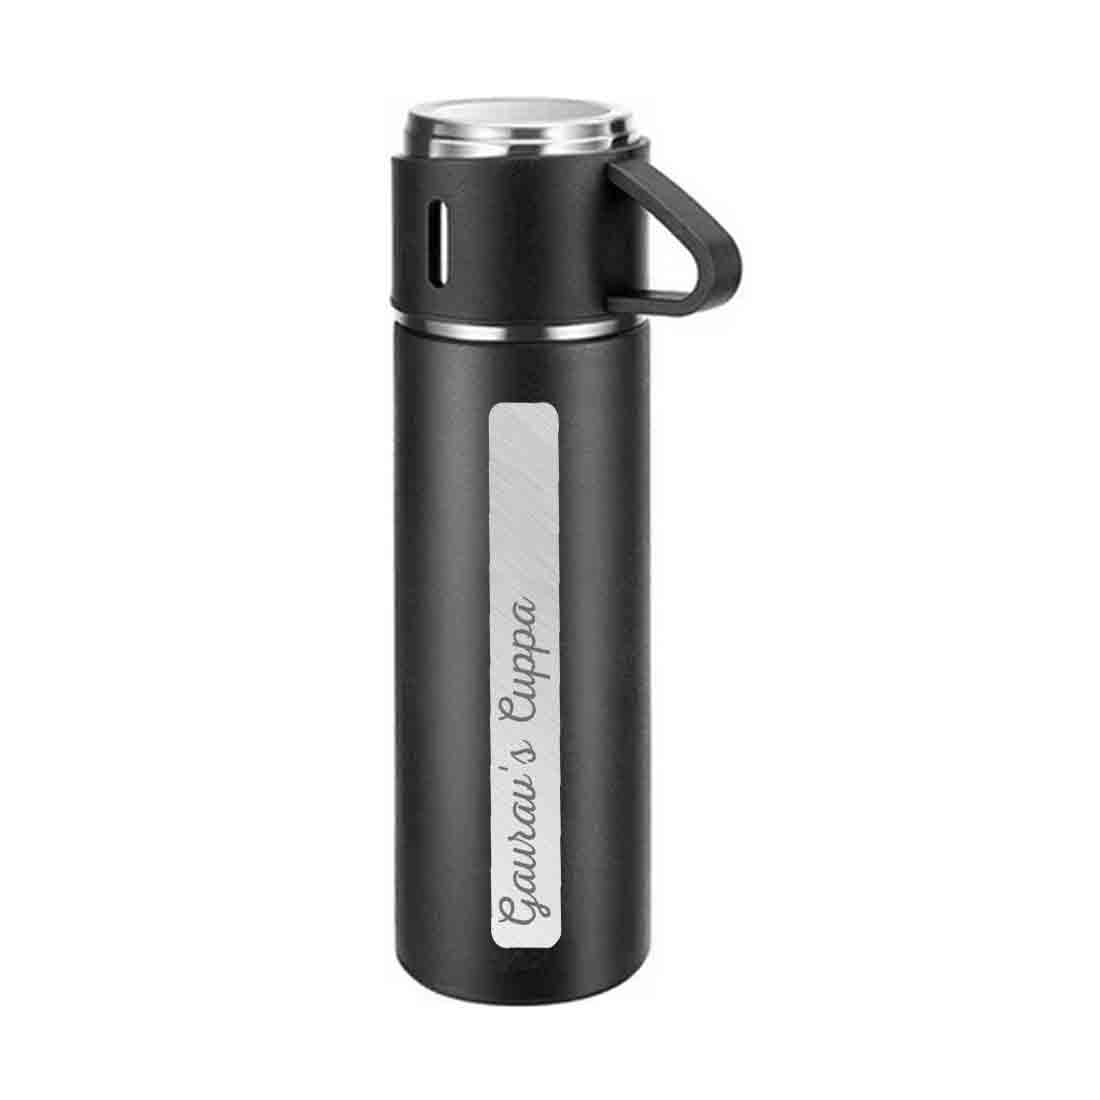 Personalized Vacuum Flask With 1 Cup for Hot & Cold Water - Add Name